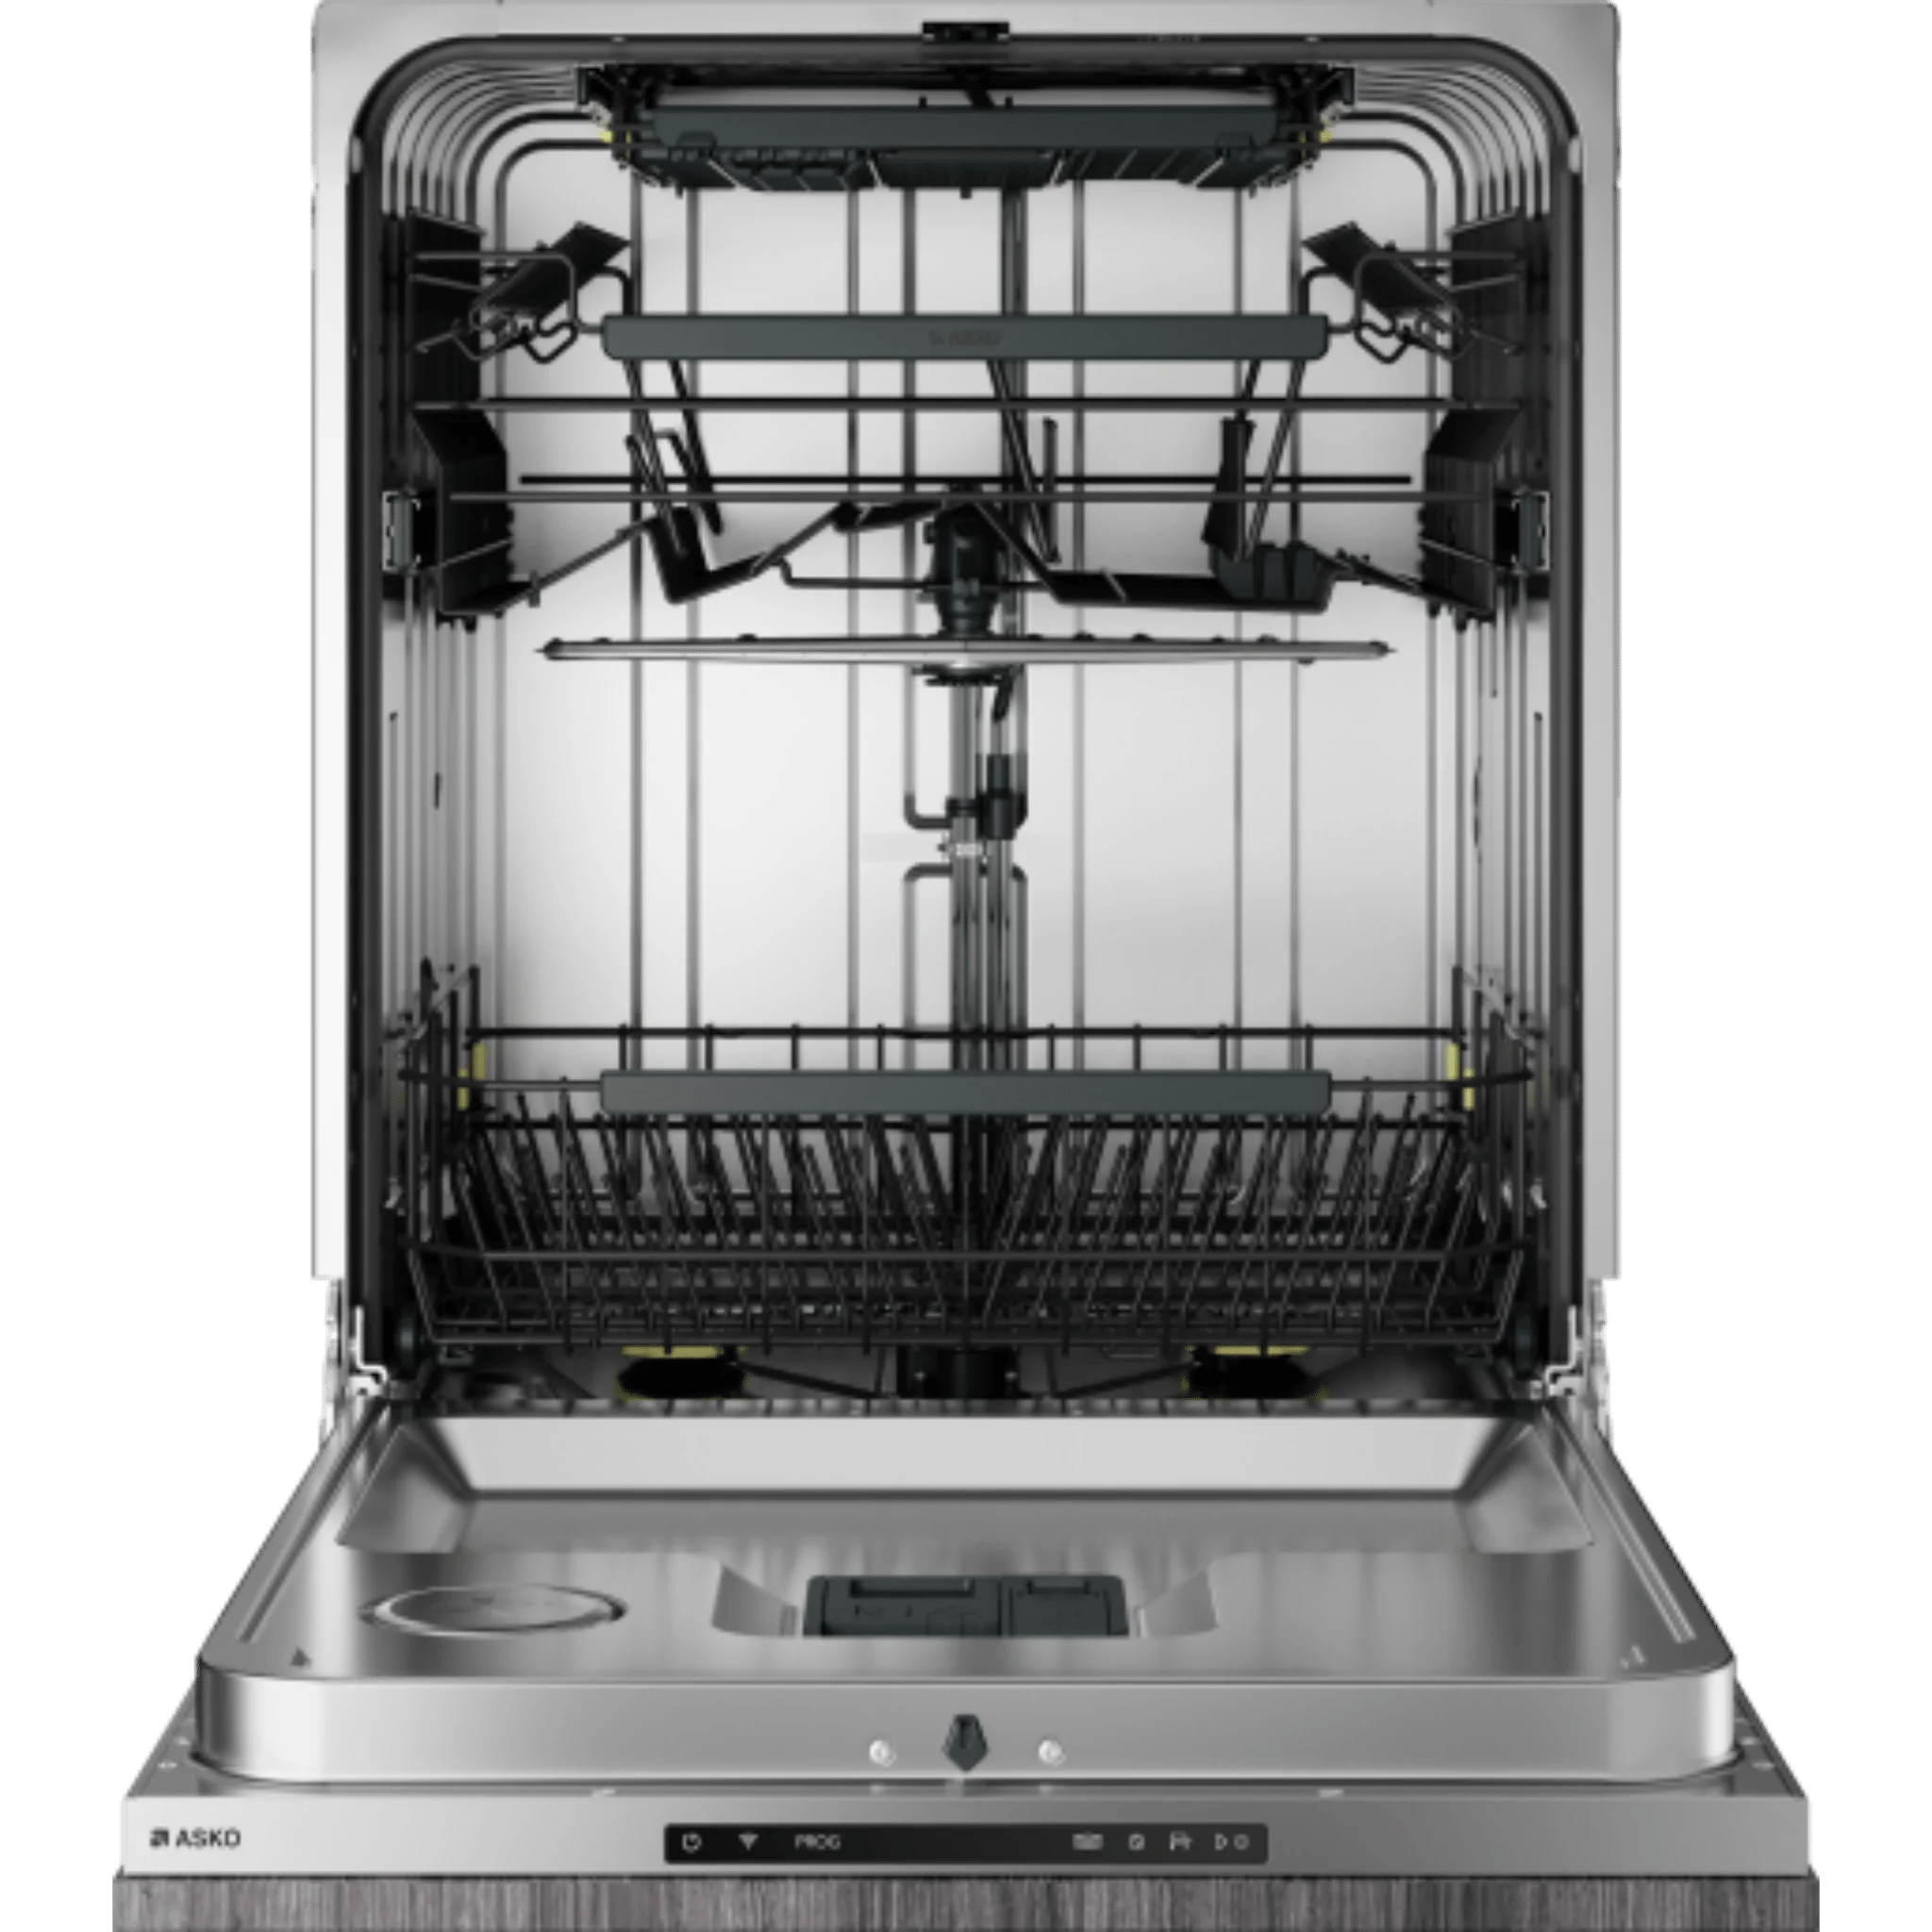 Asko Logic 24 Inch Wide 16 Place Setting Built-In Panel Ready Top Control Dishwasher with Auto Door Open Drying™ Dishwashers DFI564 Luxury Appliances Direct